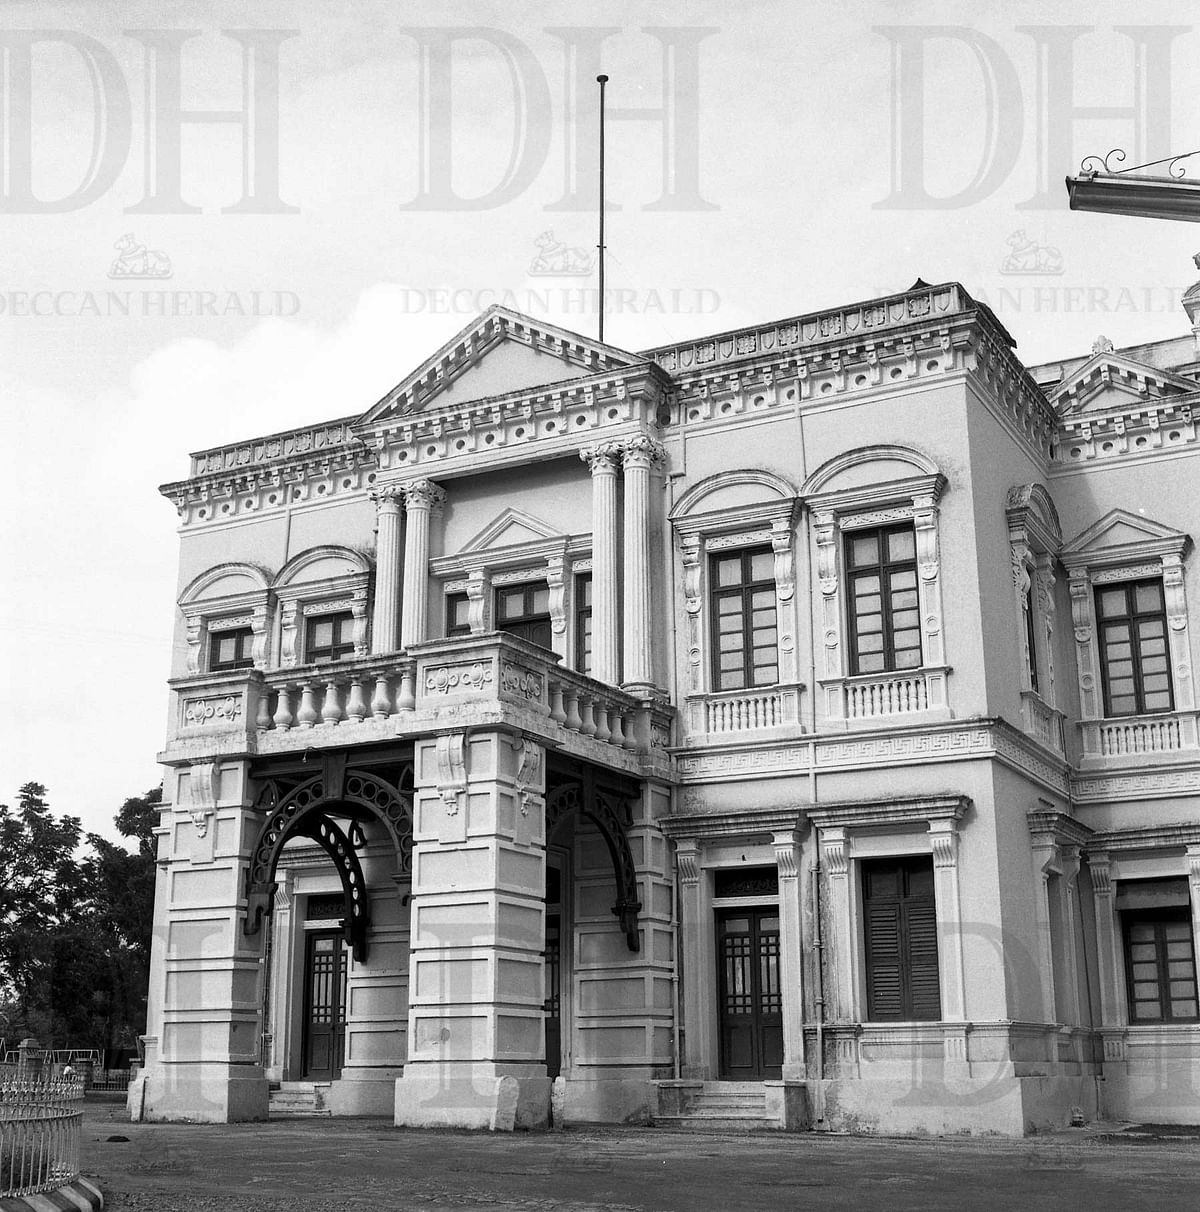 Mayo Hall was built in the honour of Lord Mayo, the 4th viceroy of India. DH Photo